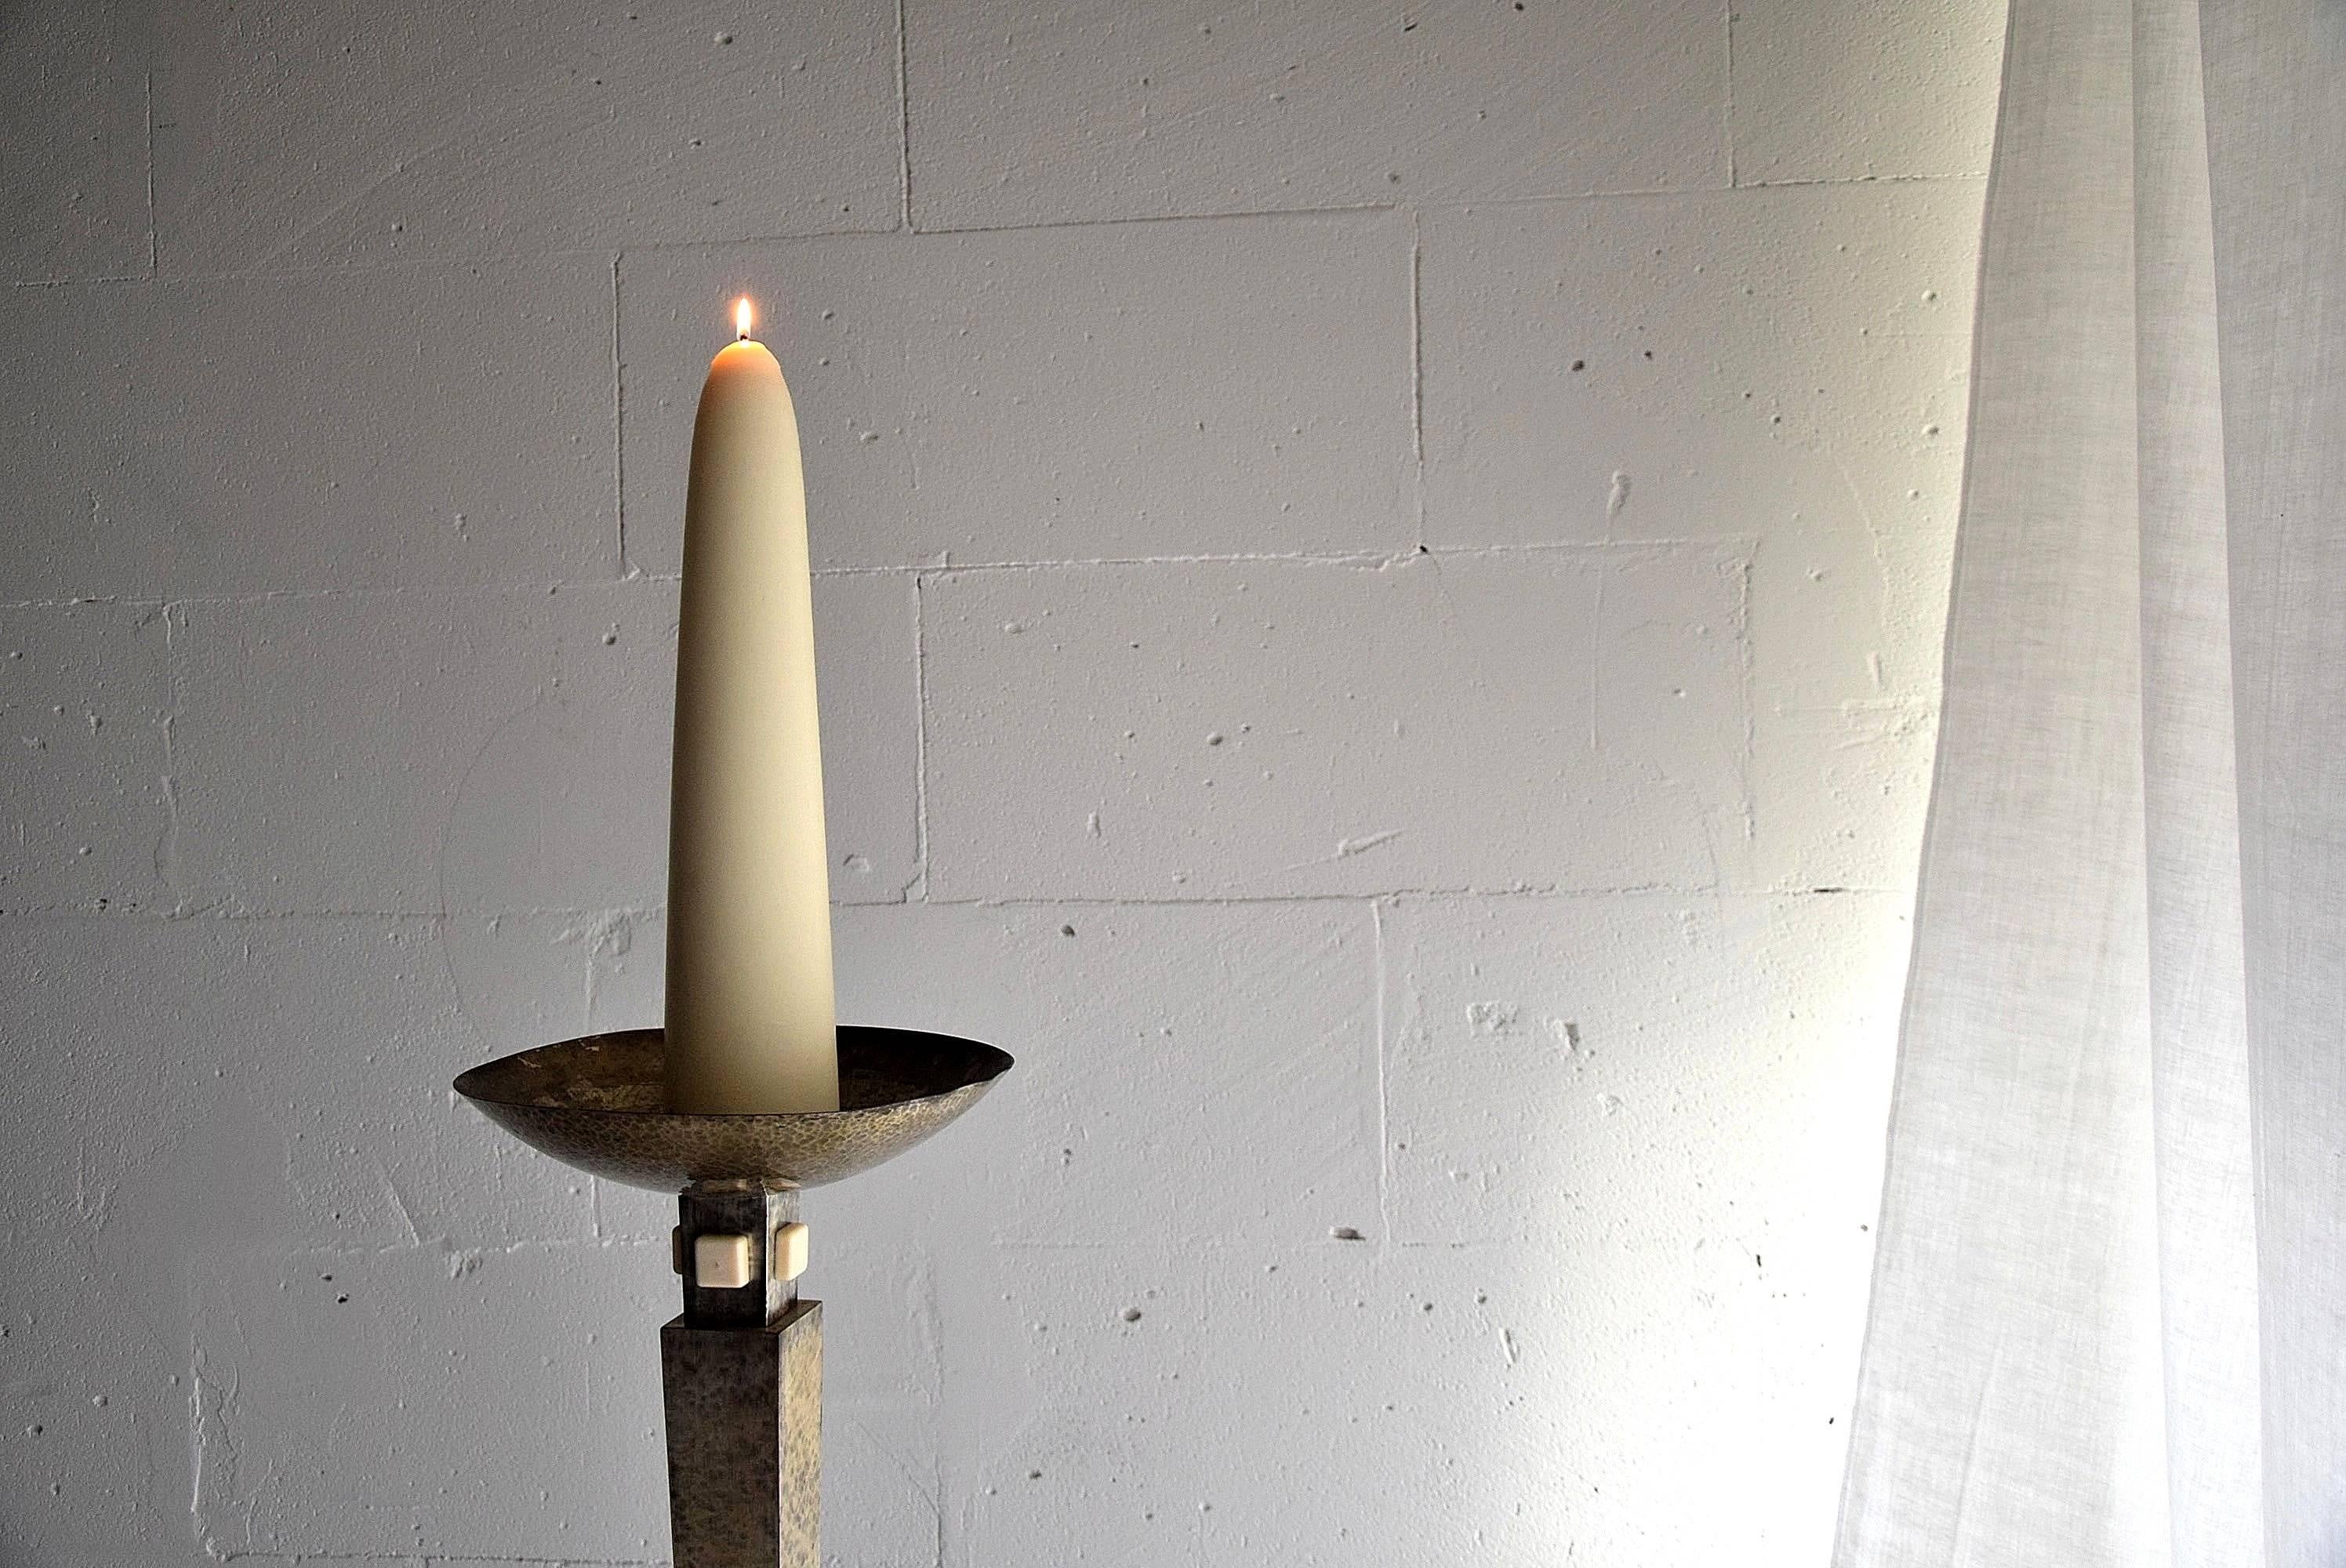 Big 1930s Art Deco church candleholder in very good condition.

Measurements: H 102 x D 27 cm.